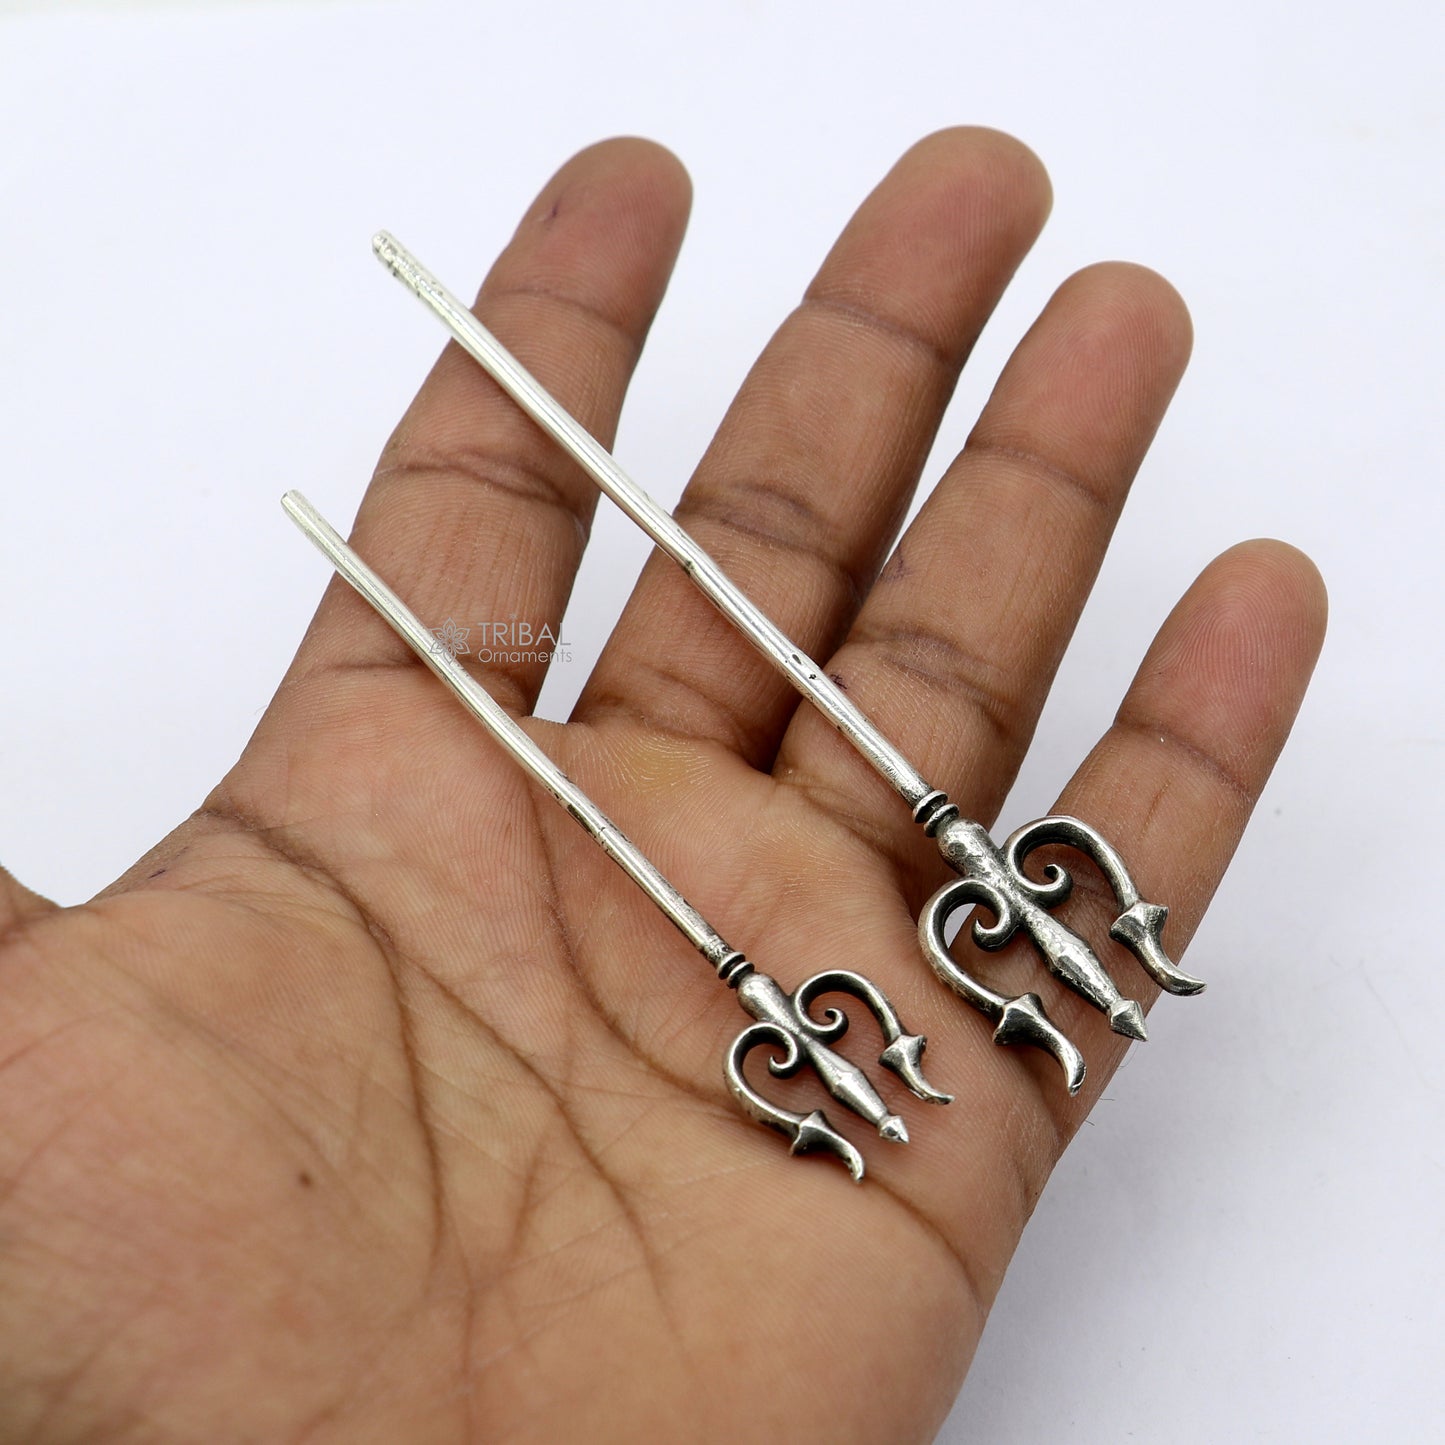 Divine Lord shiva Trident, Solid 925 sterling silver Trishul puja article, goddess trishul trident , god accessories  from india ART768 - TRIBAL ORNAMENTS